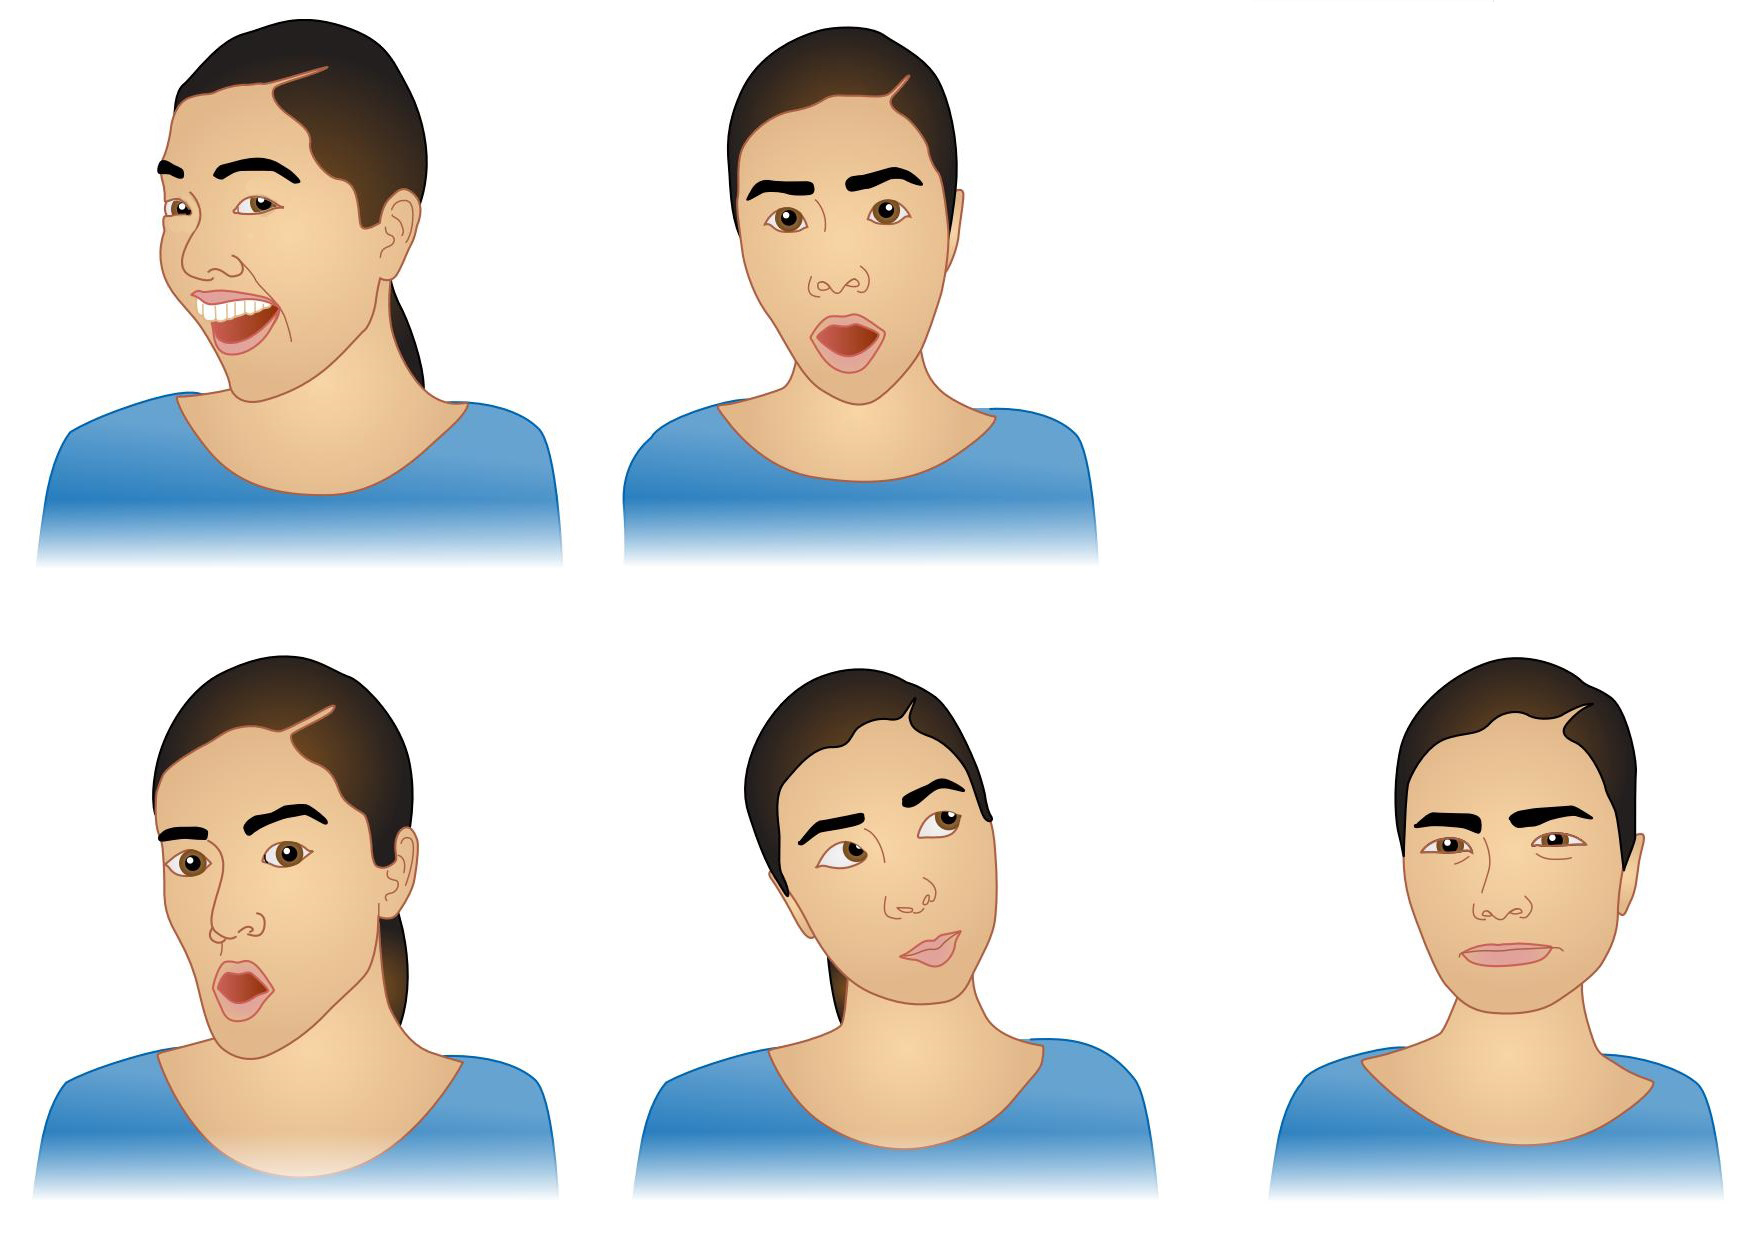 There are five images of the same woman with different facial expressions in each. The first woman is smiling with eyes slightly squinted. The second woman has her eyes wide, eyebrows raised, and mouth open in an O. The third woman has her mouth open slightly with one eyebrow raised. The fourth woman has her head tilted to the left, pursed lips, and eyes looking up and to the right. The fifth woman is squinting her eyes with lips tightly closed together.